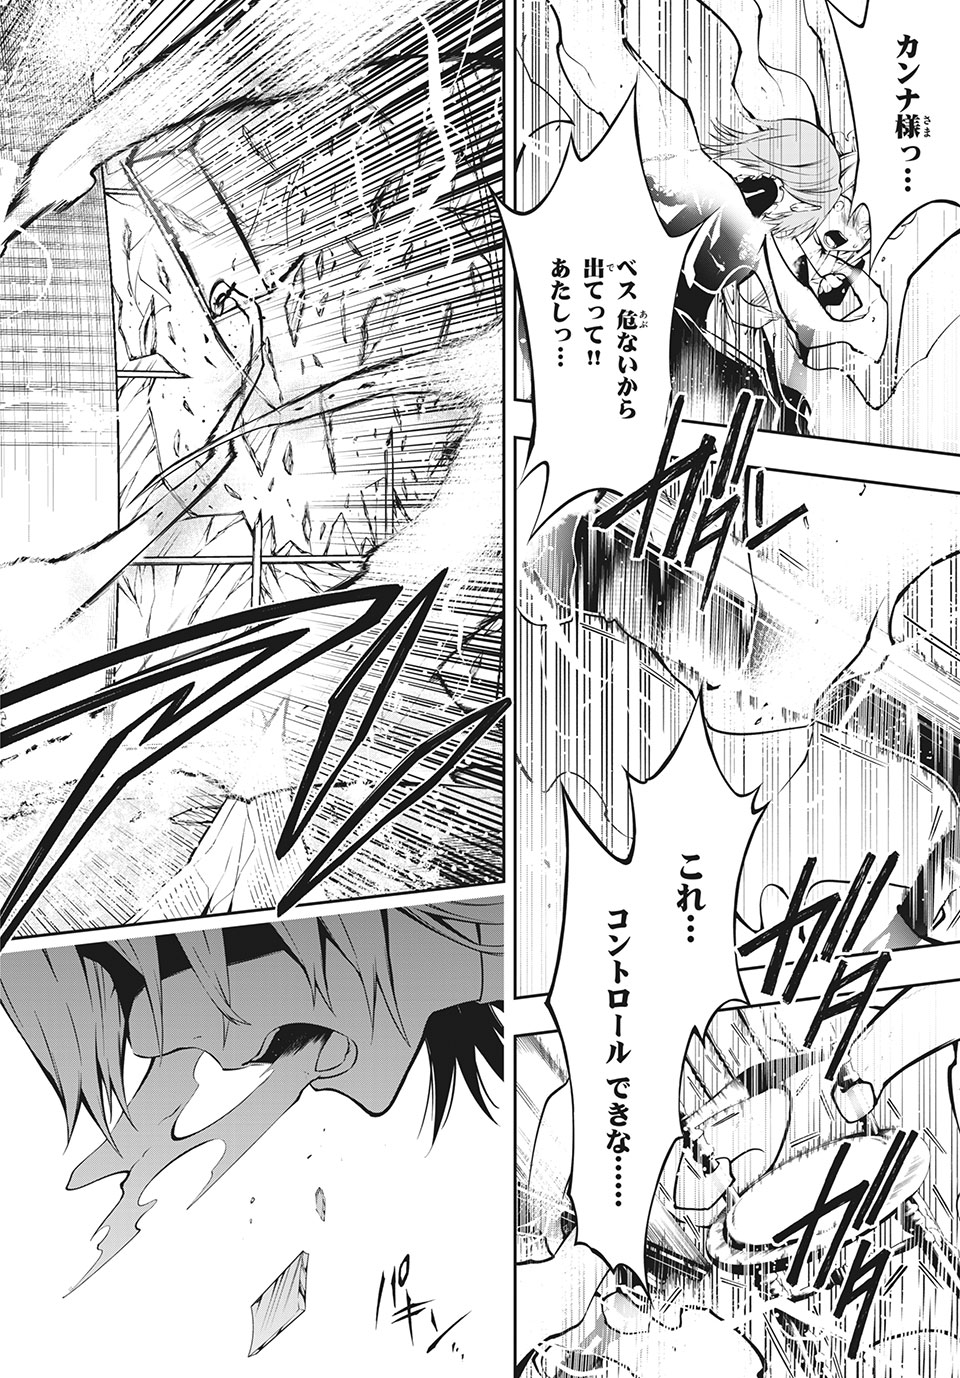 Shaman King: and a garden 第1.2話 - Page 9